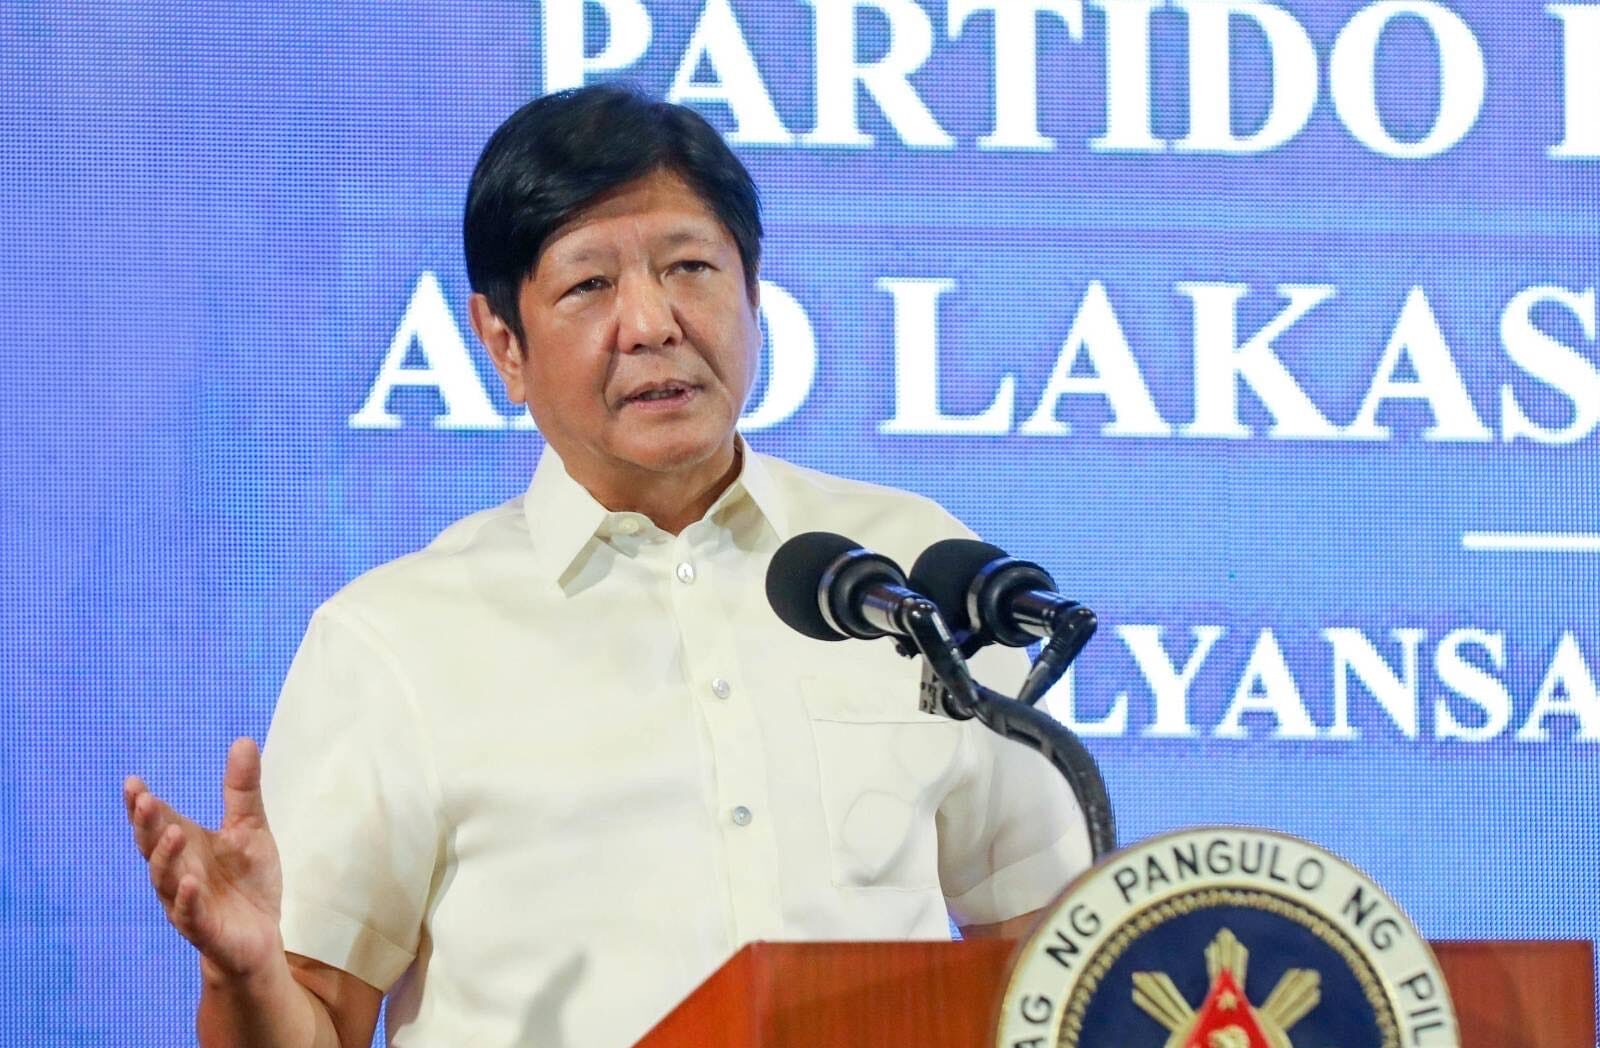 President Ferdinand Marcos Jr. on Friday said the national government is already exhausting all efforts to bring the Filipino seafarers on board the MV Tutor vessel to Djibouti and then back home.